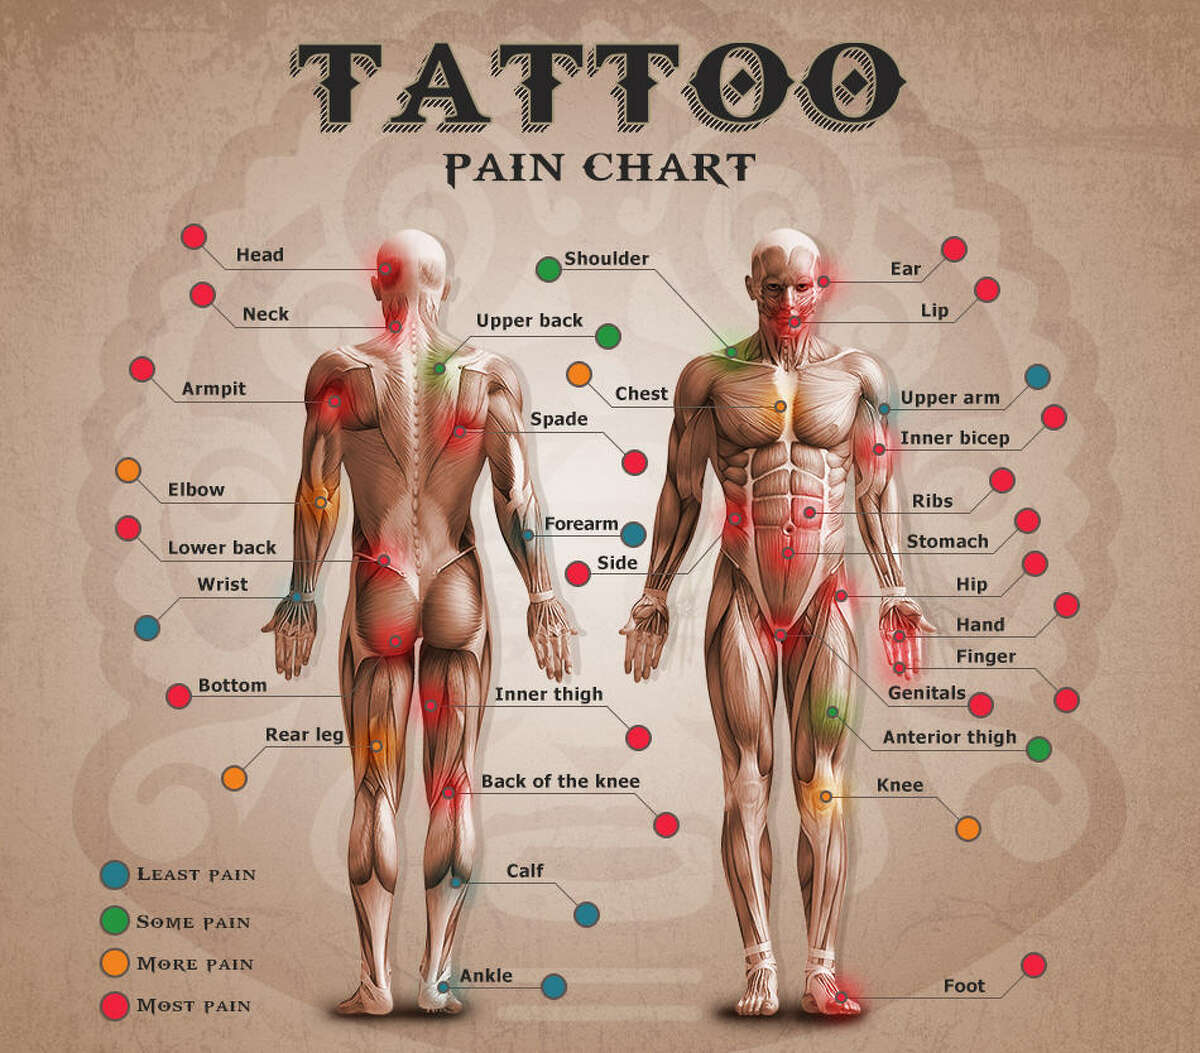 Wondering how much that next tattoo will hurt? Check out this website first